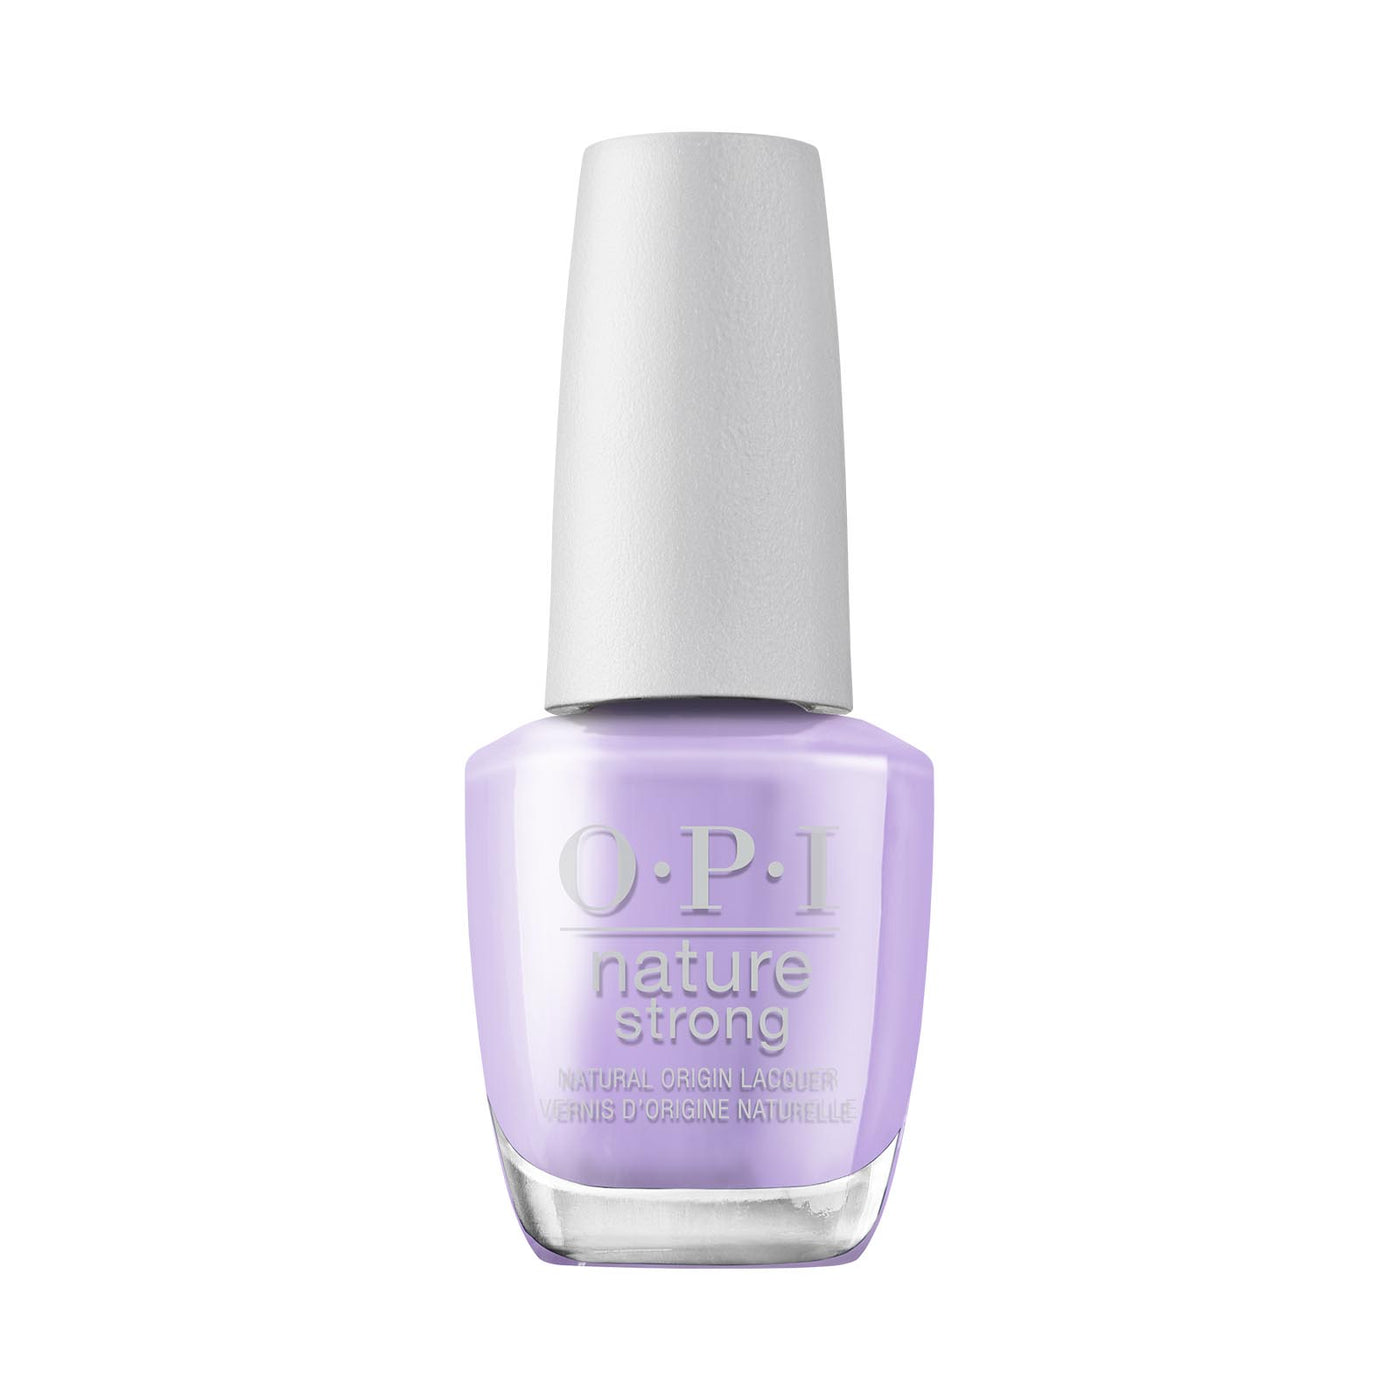 OPI Nature Strong NAT021 Spring Into Action (15ml)